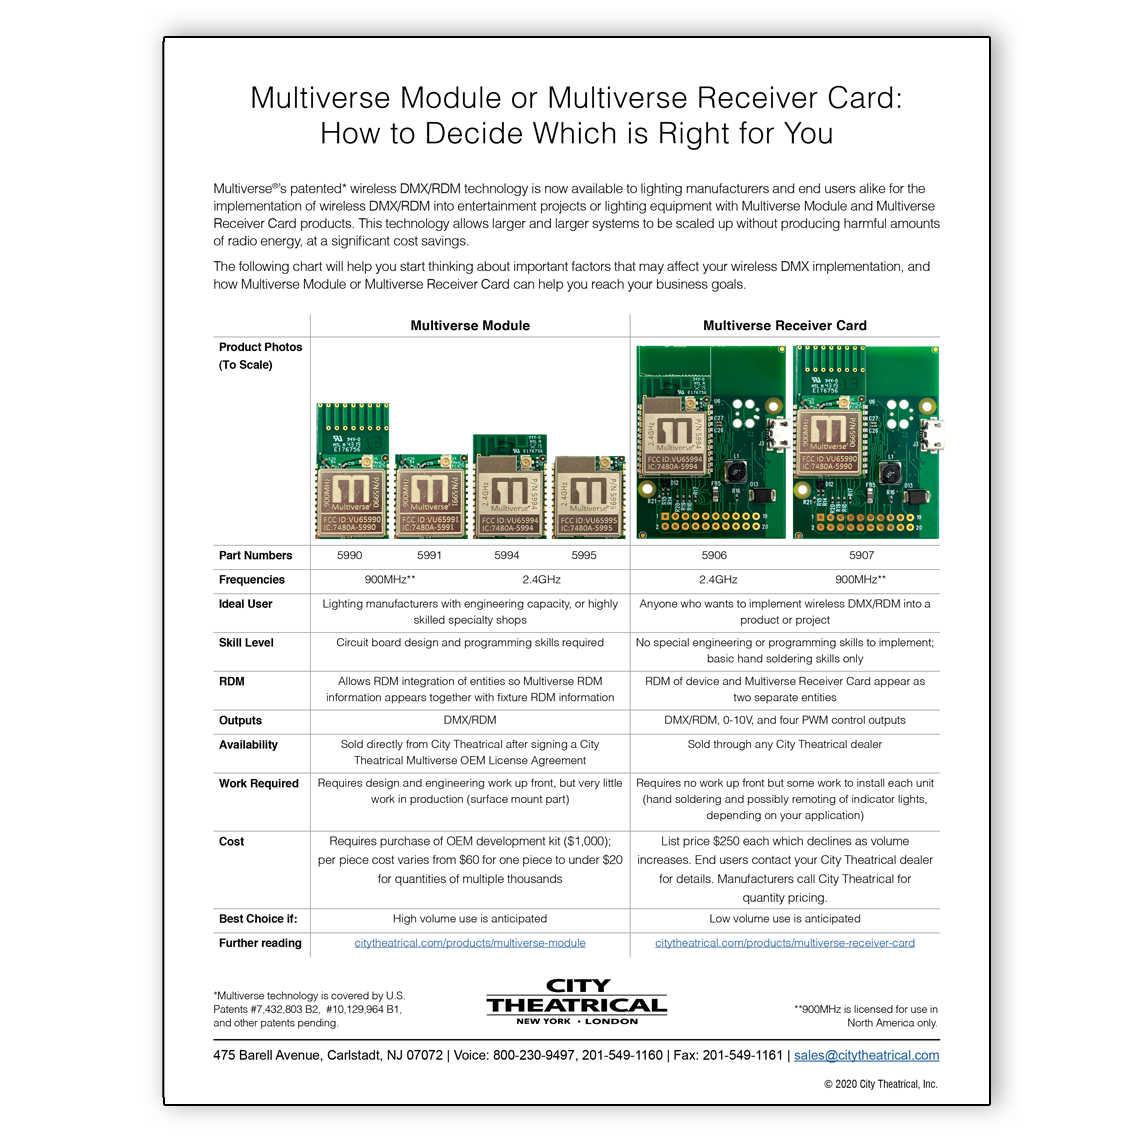 Multiverse Module or Multiverse Receiver Card: How to Decide Which is Right for You